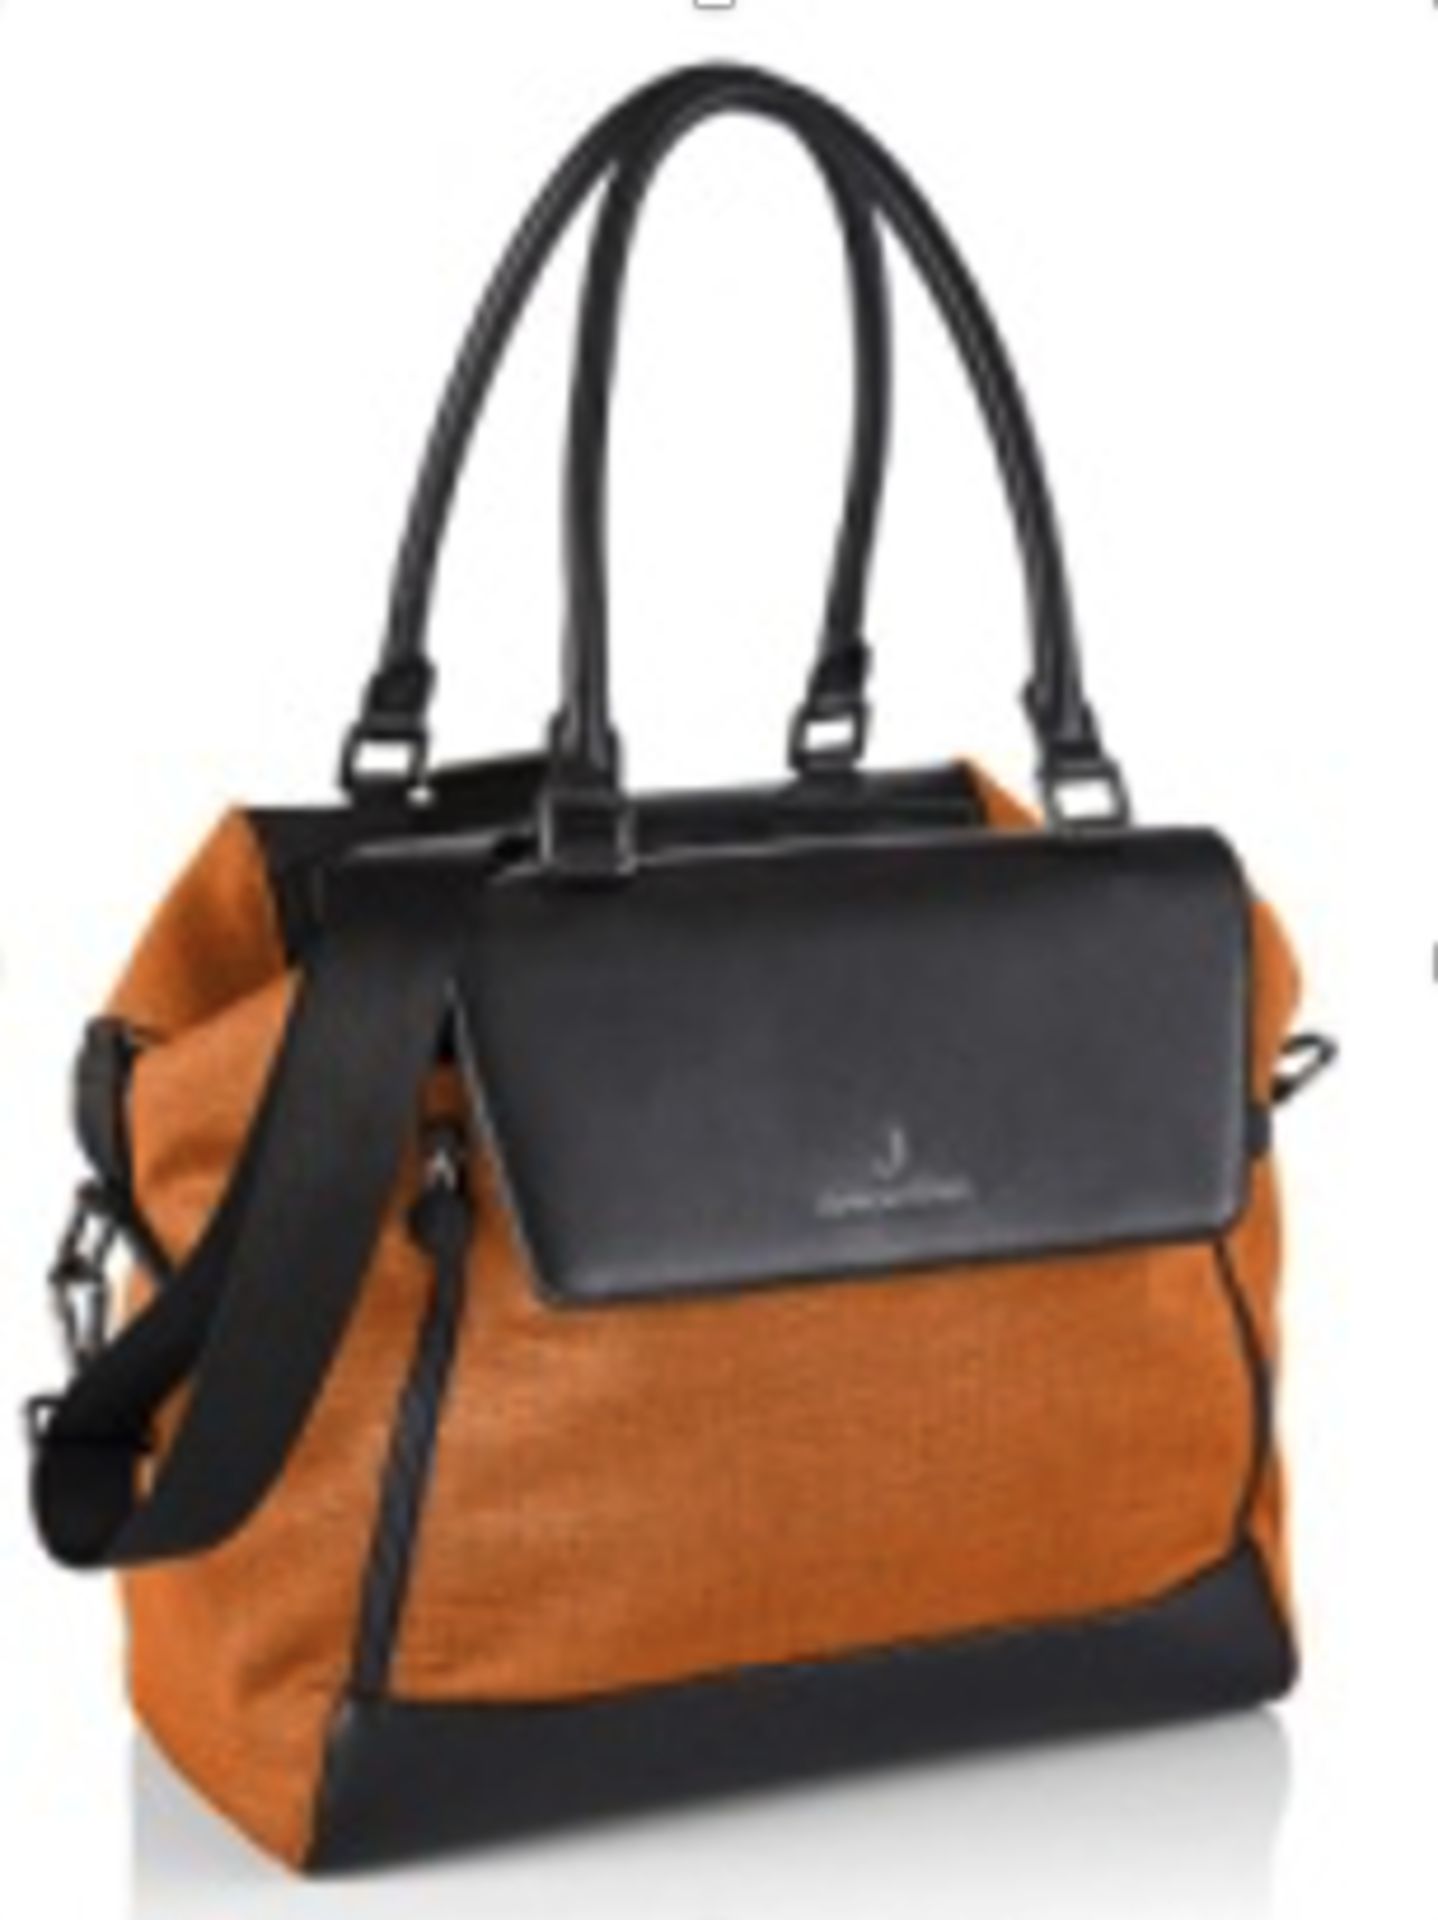 Title: JESSIE CHANGING BAG - BOMBAY RUST - £140Description: JESSIE CHANGING BAG - BOMBAY RUST - £